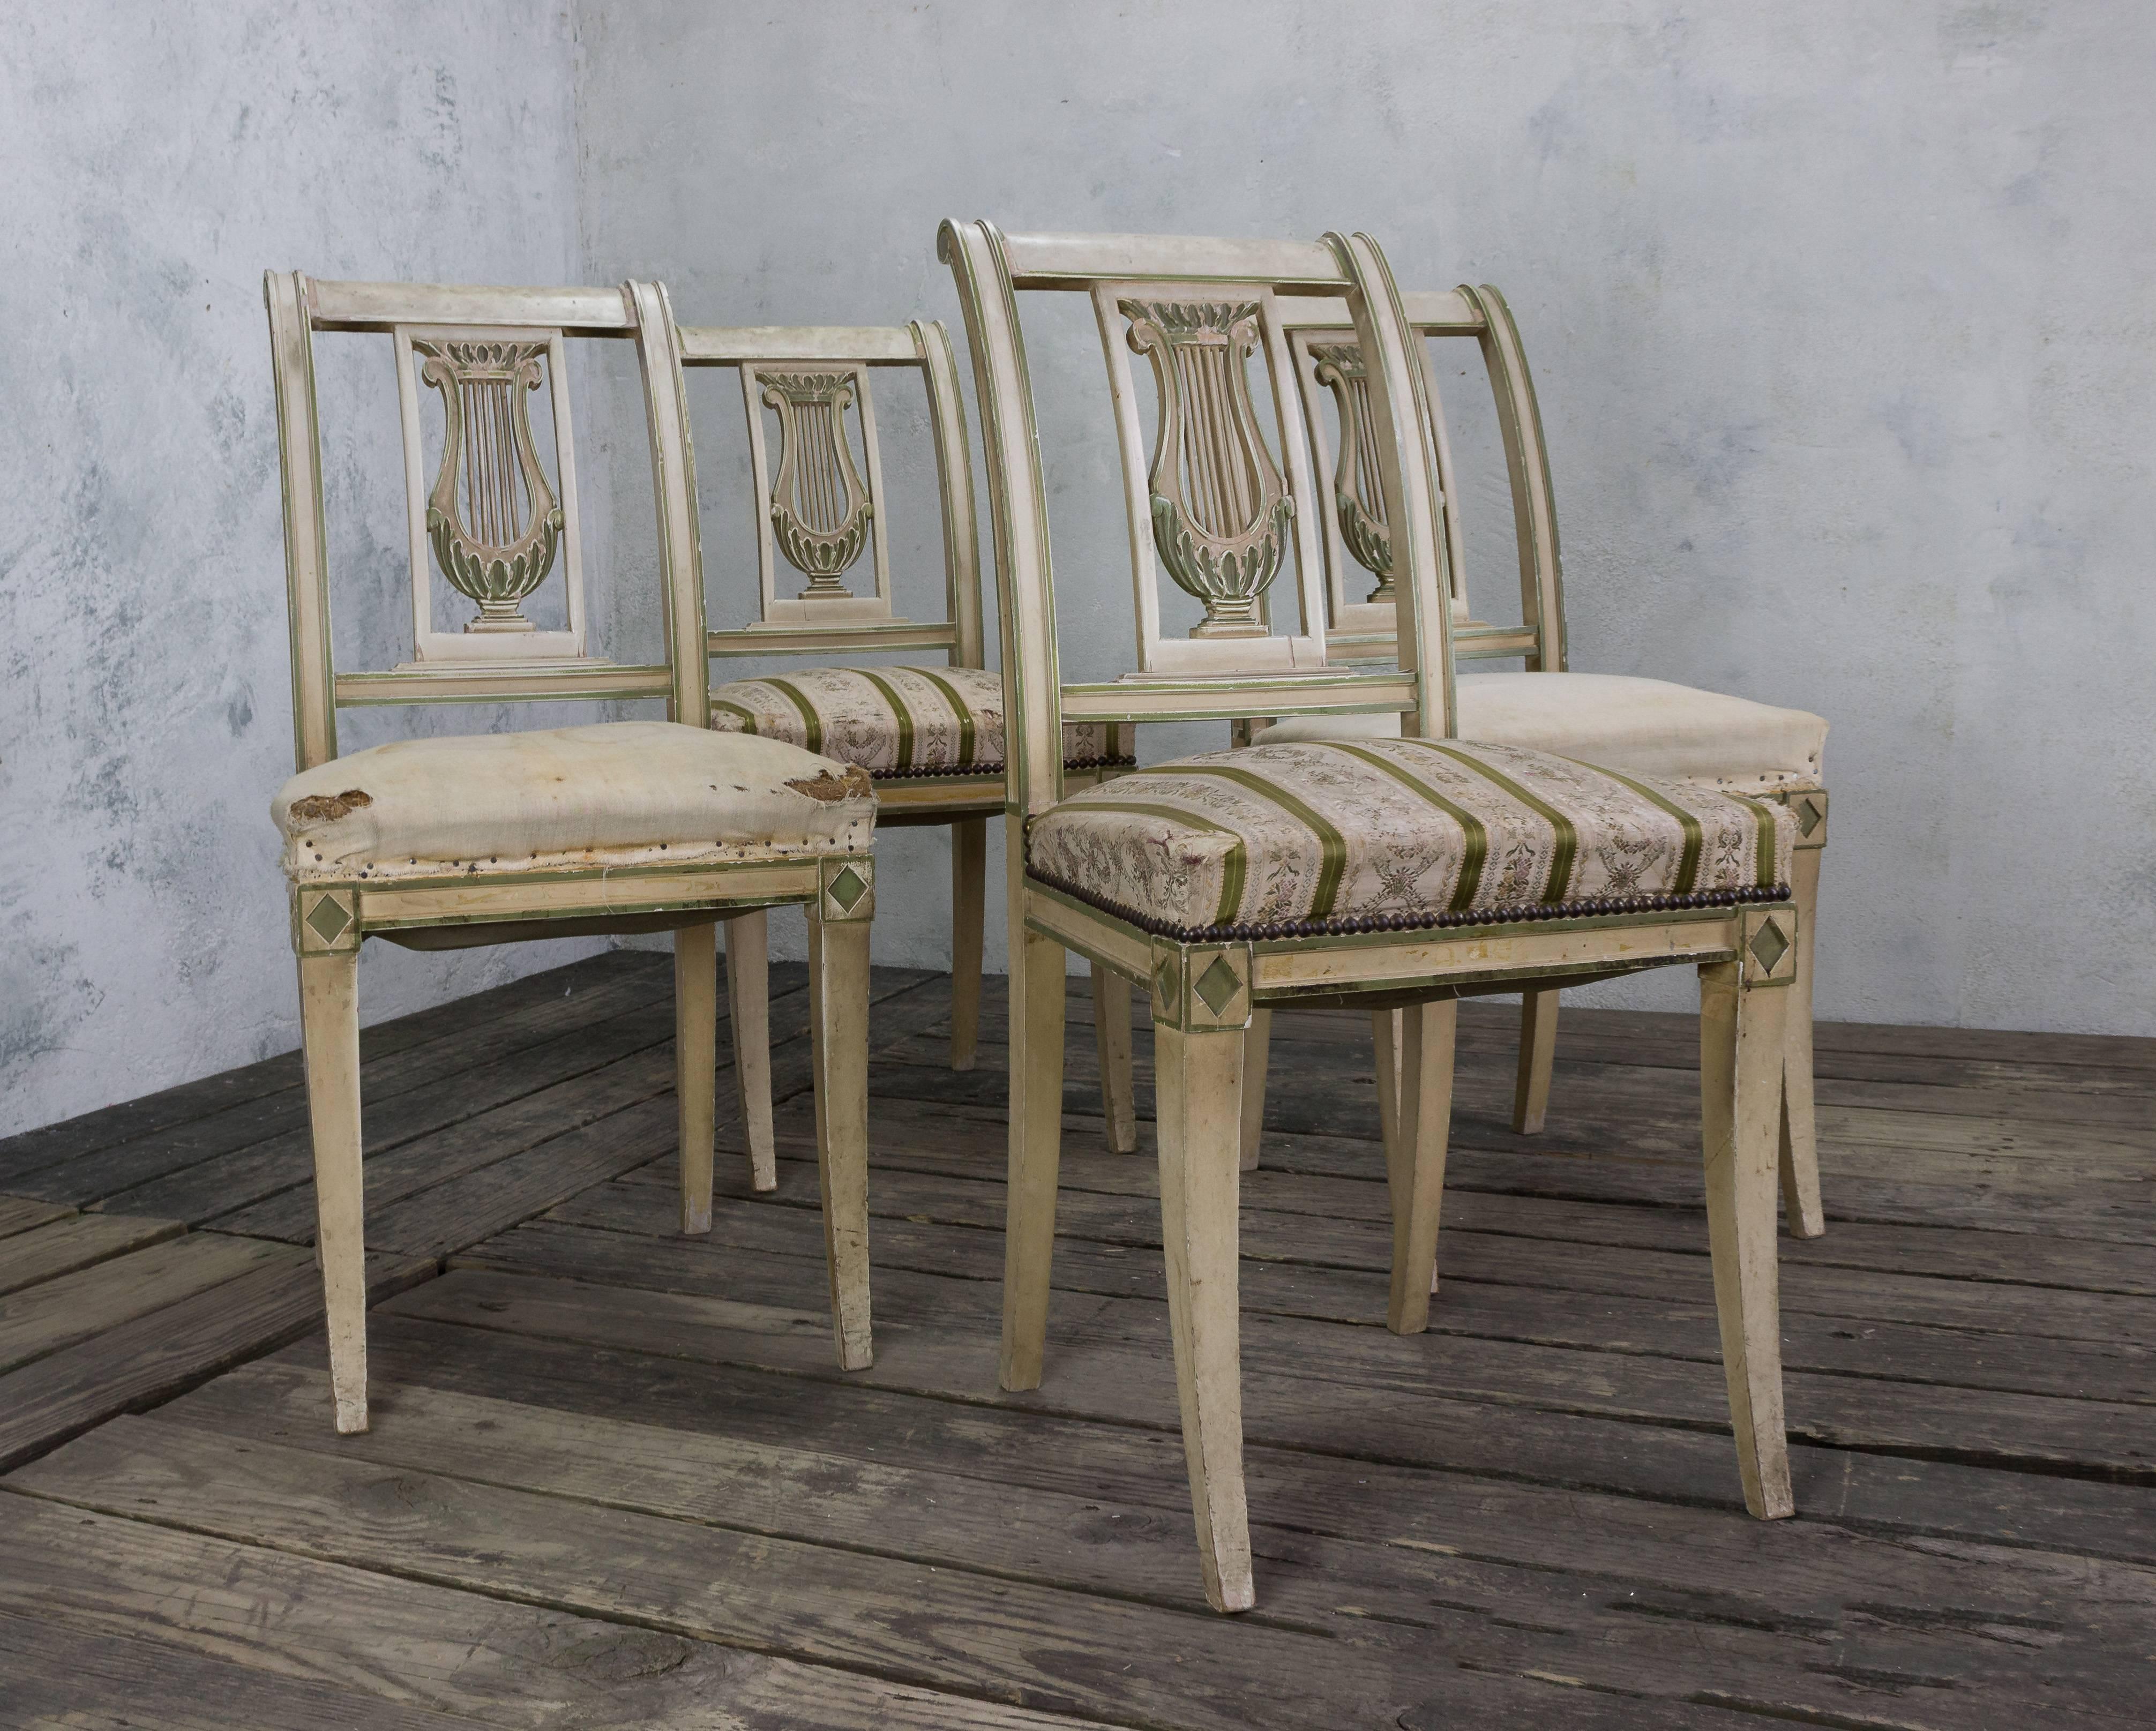 An elegant set of four Neoclassical style French painted dining room chairs, circa 1920. This stunning set of Neoclassical style French dining room chairs is sure to bring beauty and sophistication to any home. The intricate frames feature lovely